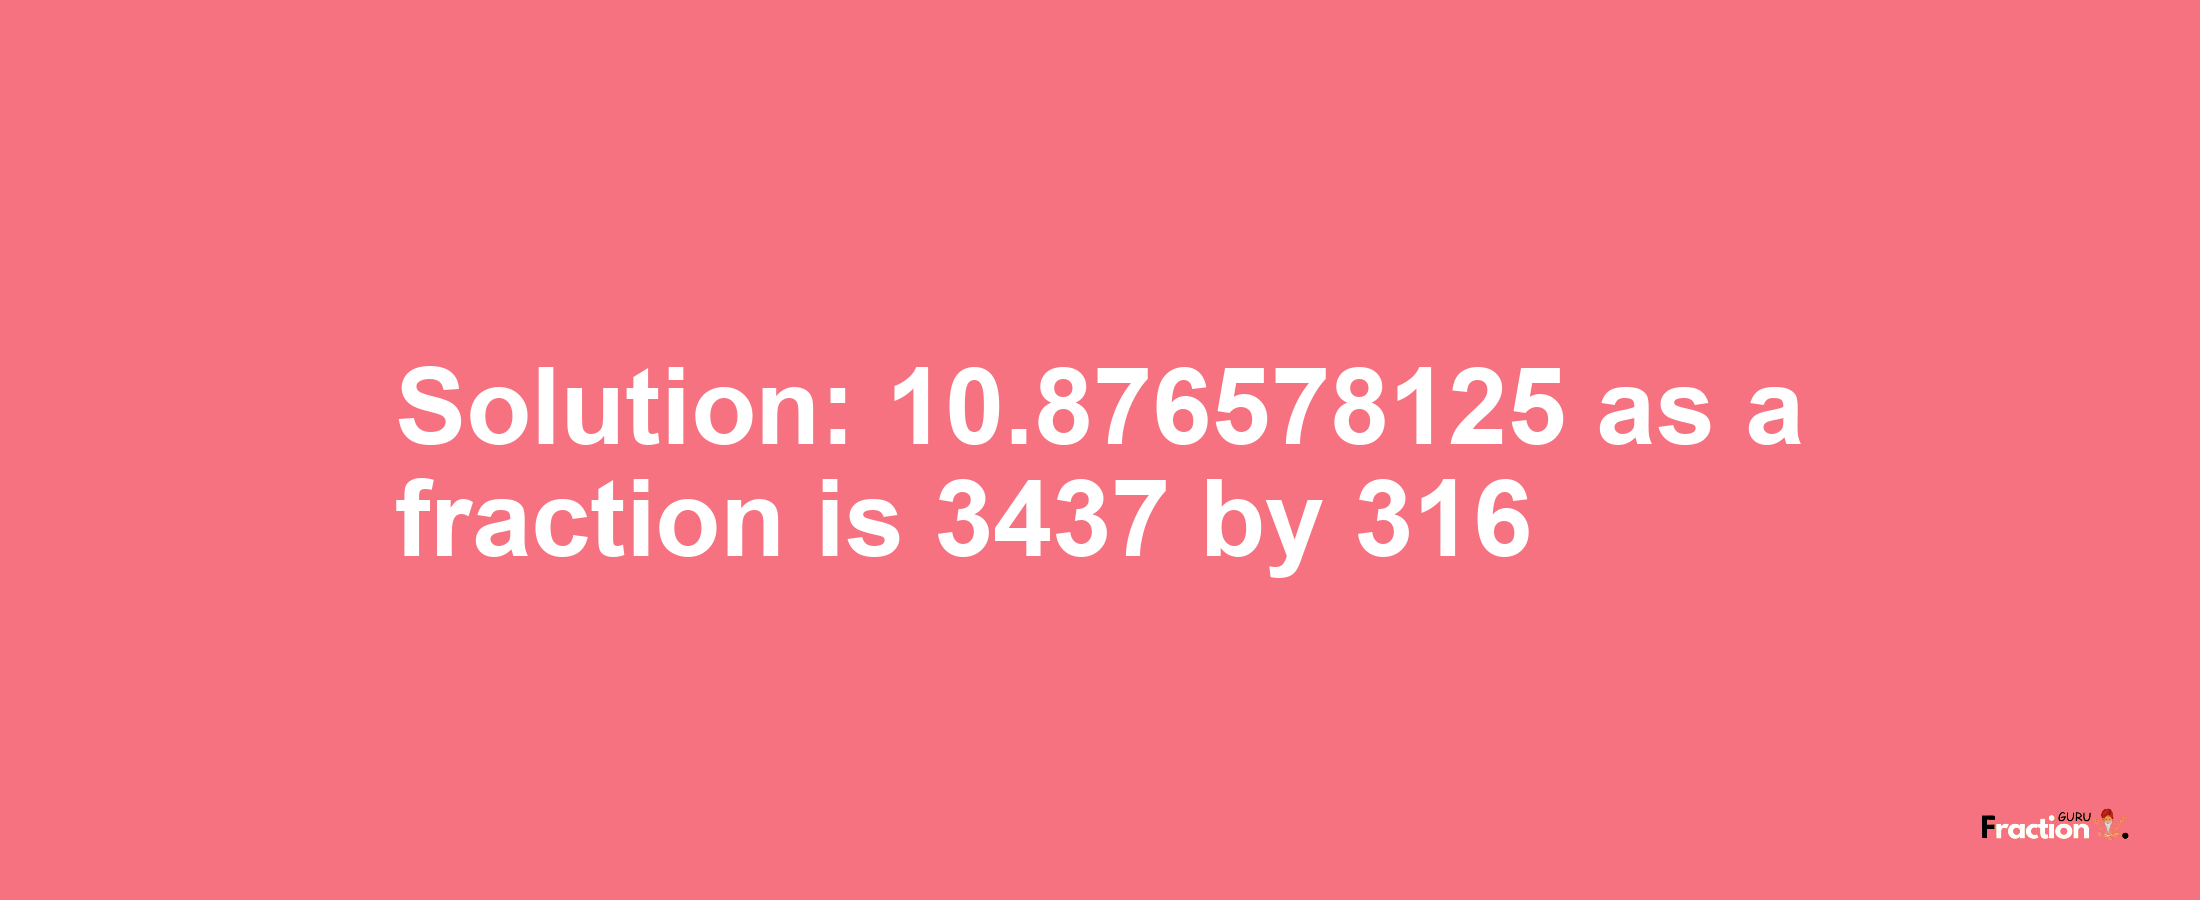 Solution:10.876578125 as a fraction is 3437/316